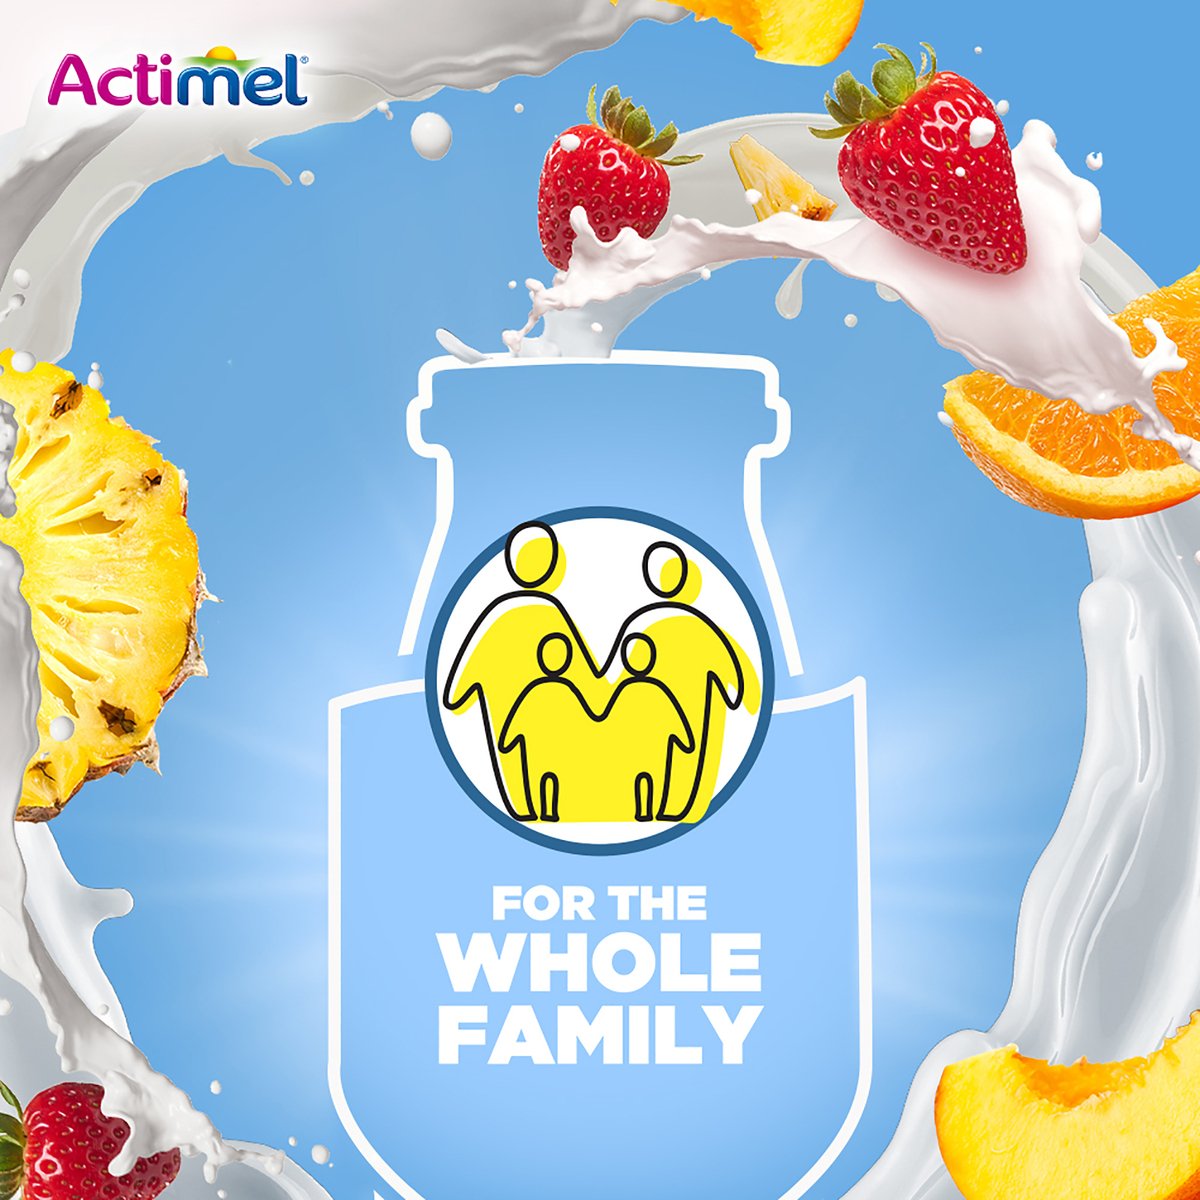 Actimel Multi-Fruit Flavored Low Fat Dairy Drink 4 x 93 ml